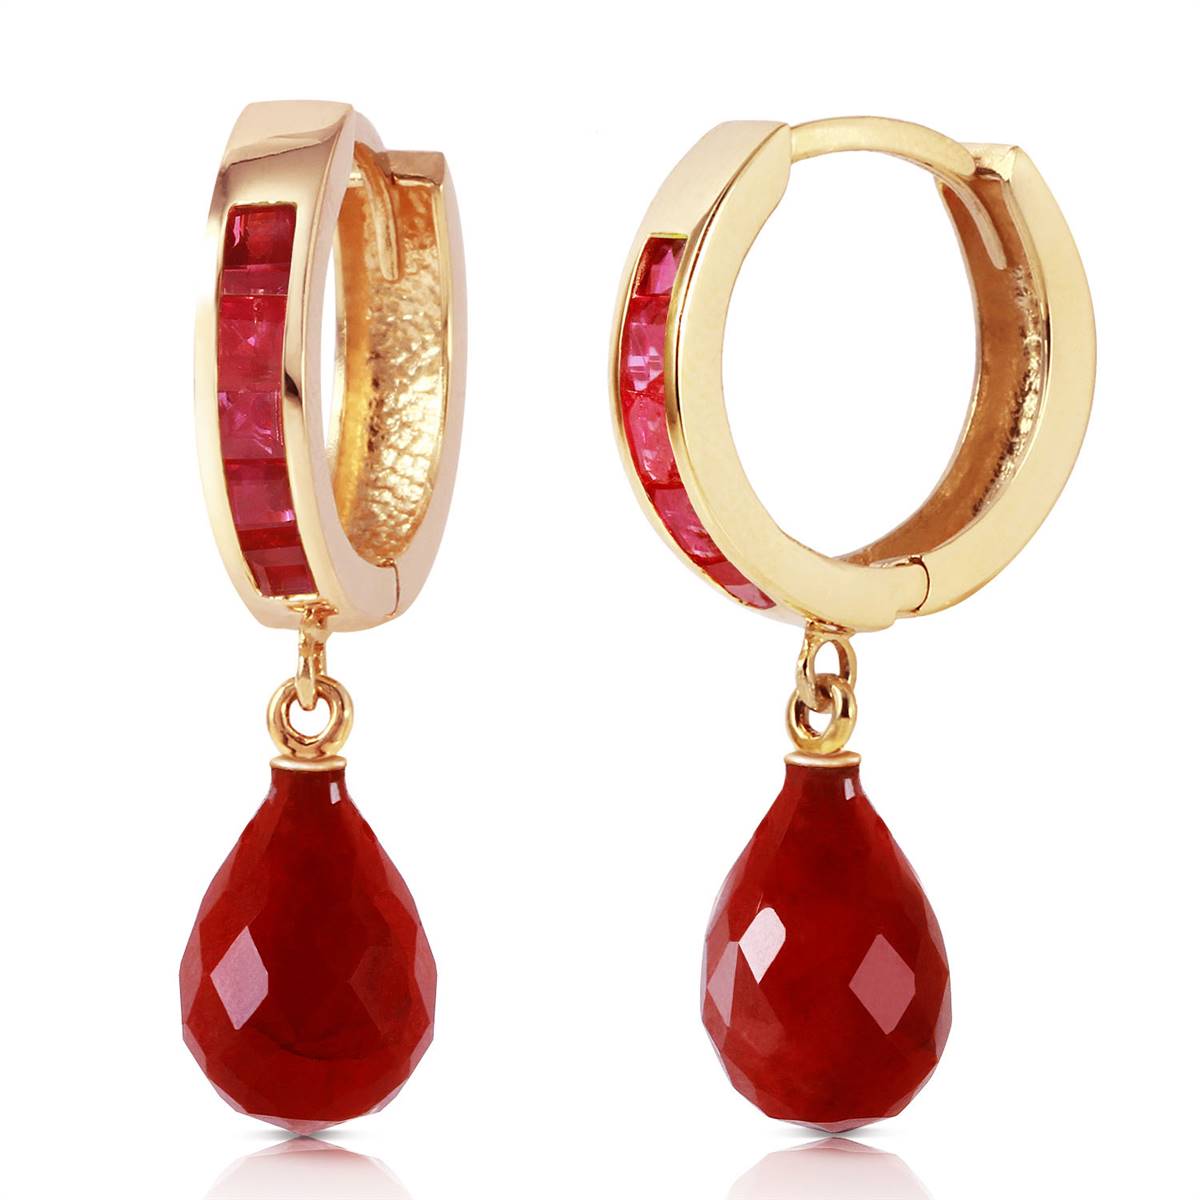 7.8 Carat 14K Solid Yellow Gold Olympia Ruby Earrings